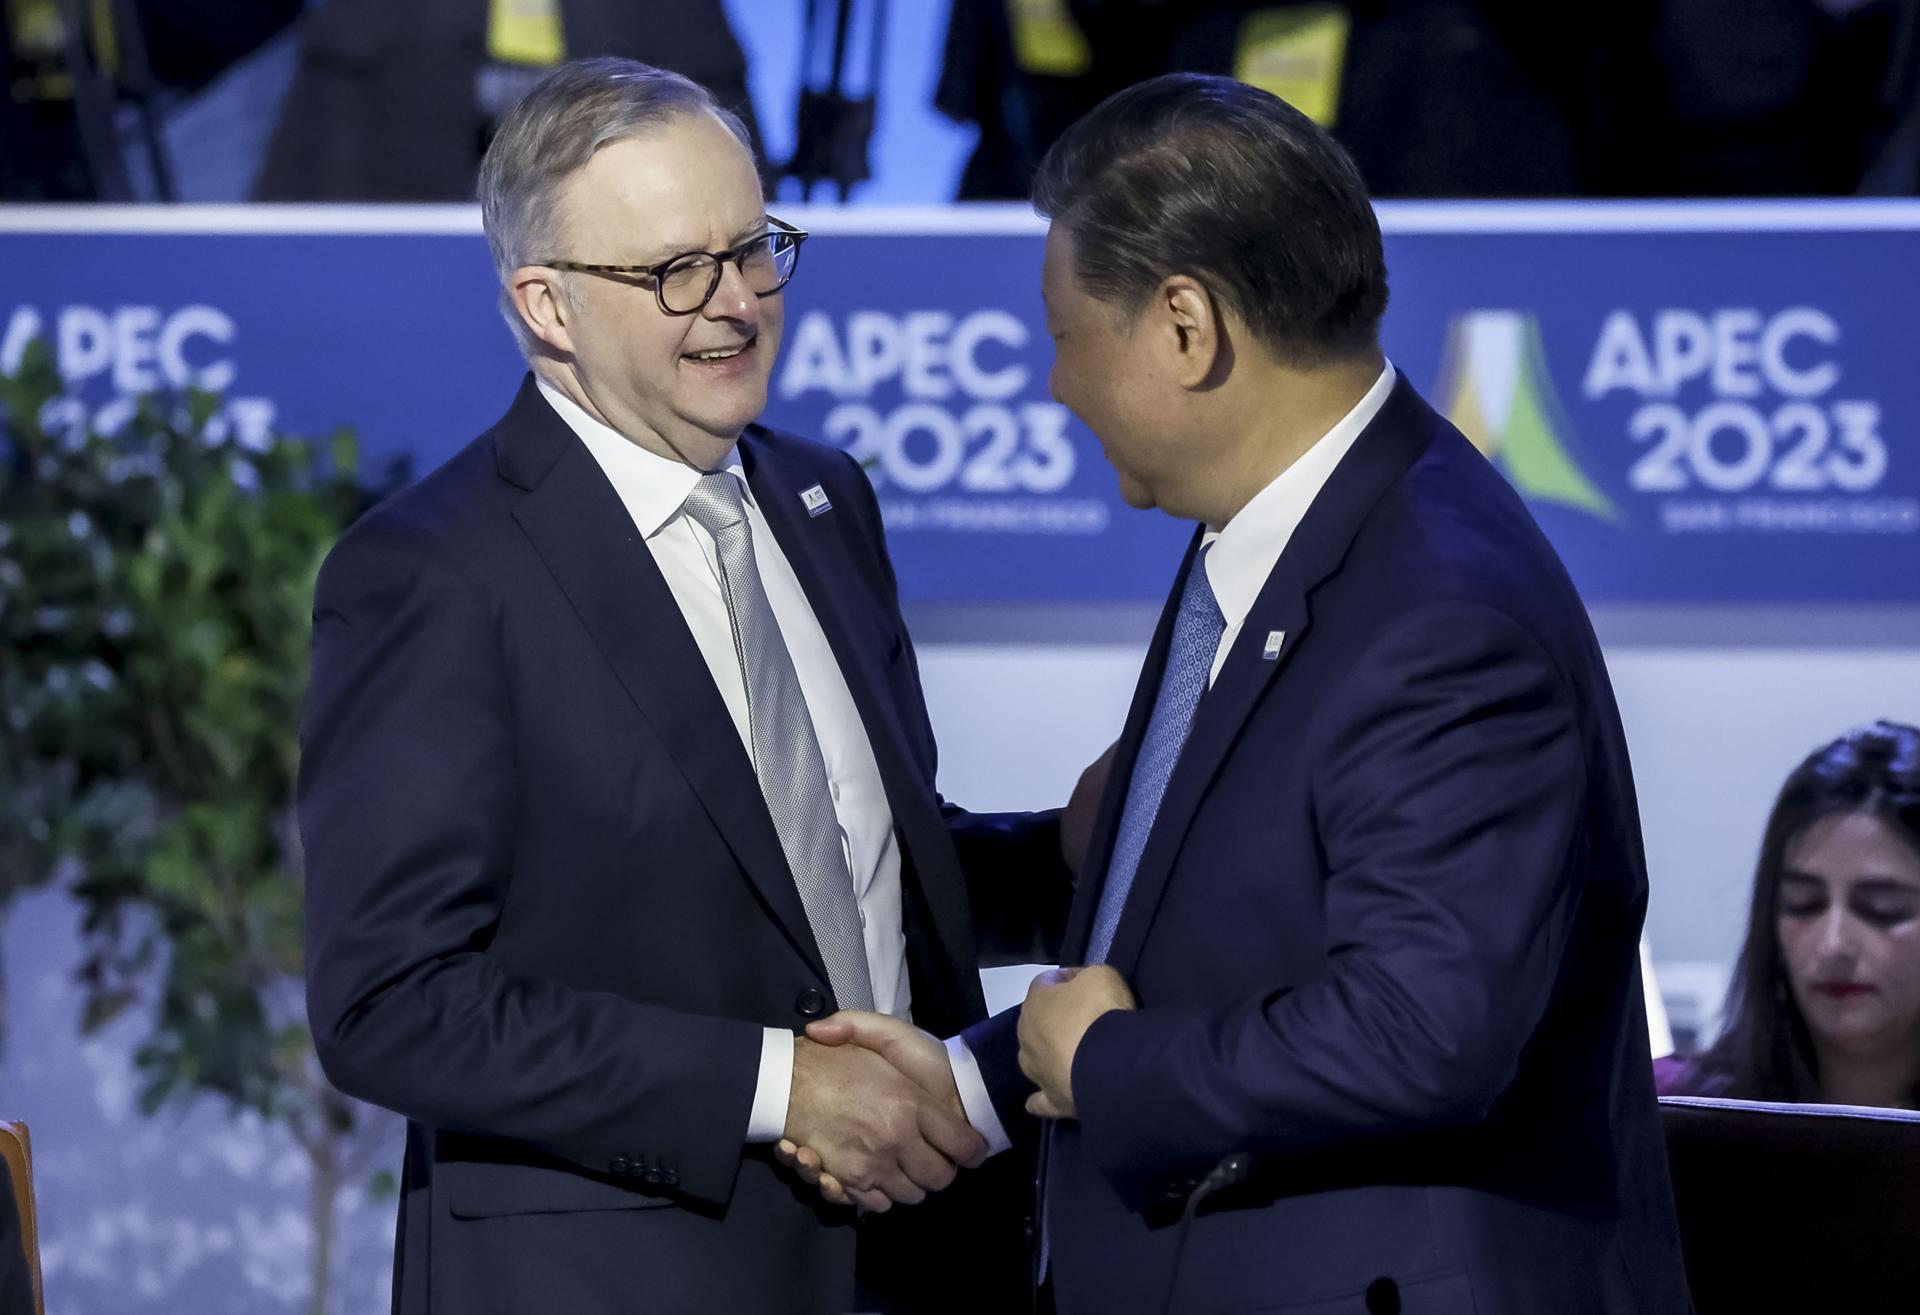 Australia Prime Minster Anthony Albanese (L) shakes hands with China's President Xi Jinping (R), at the APEC Economic Leaders' Retreat, during the annual Asia-Pacific Economic Cooperation conference at the Moscone West Convention Center in San Francisco, California, US, 17 November 2023. EFE-EPA/JOHN G. MABANGLO
